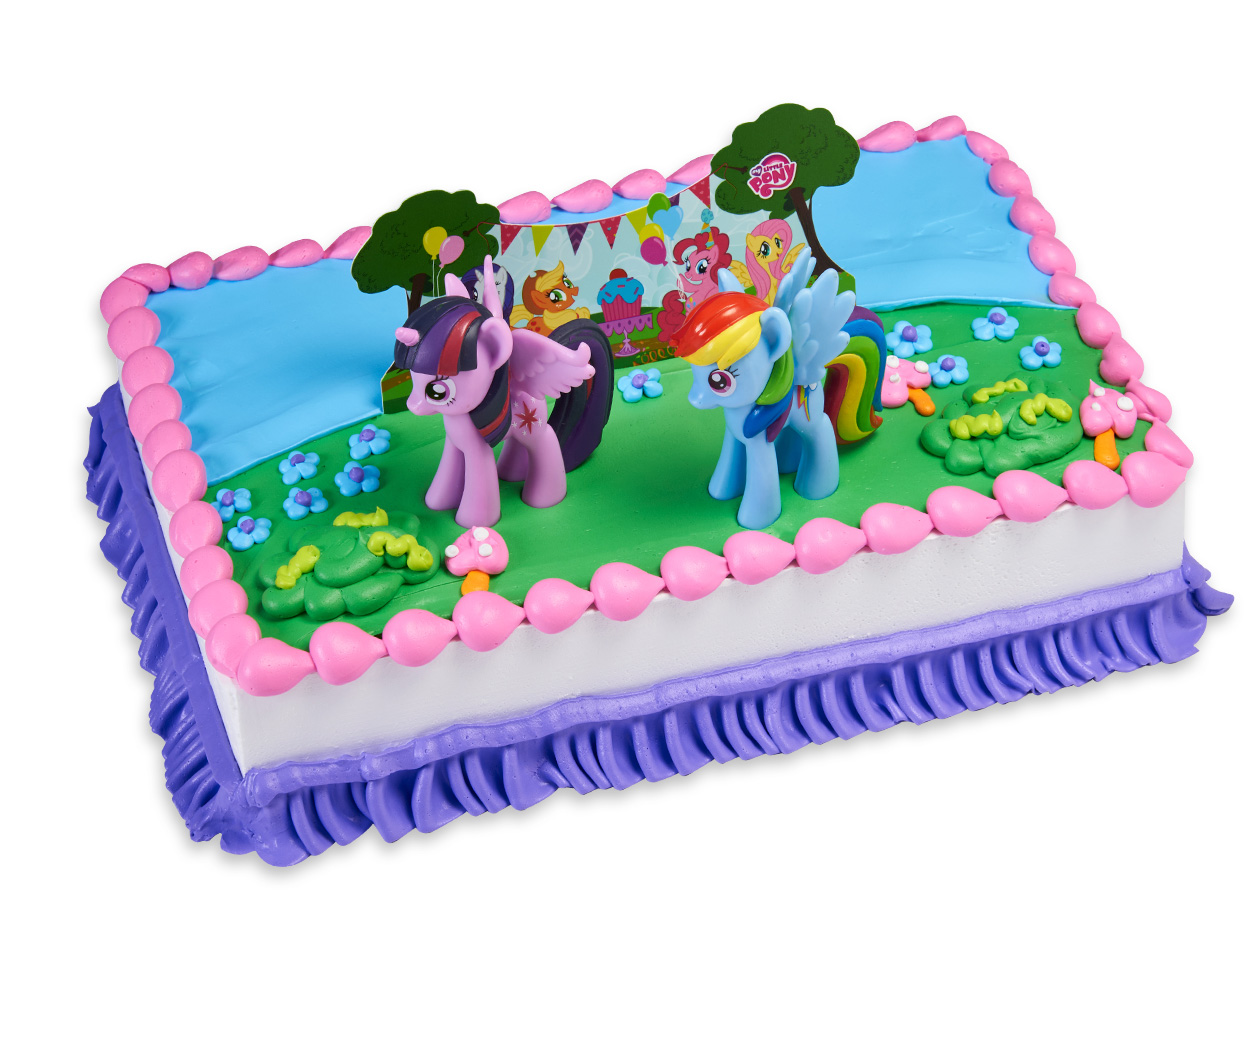 Little Kids Birthday Cake Gallery - The Incredible Cake ...